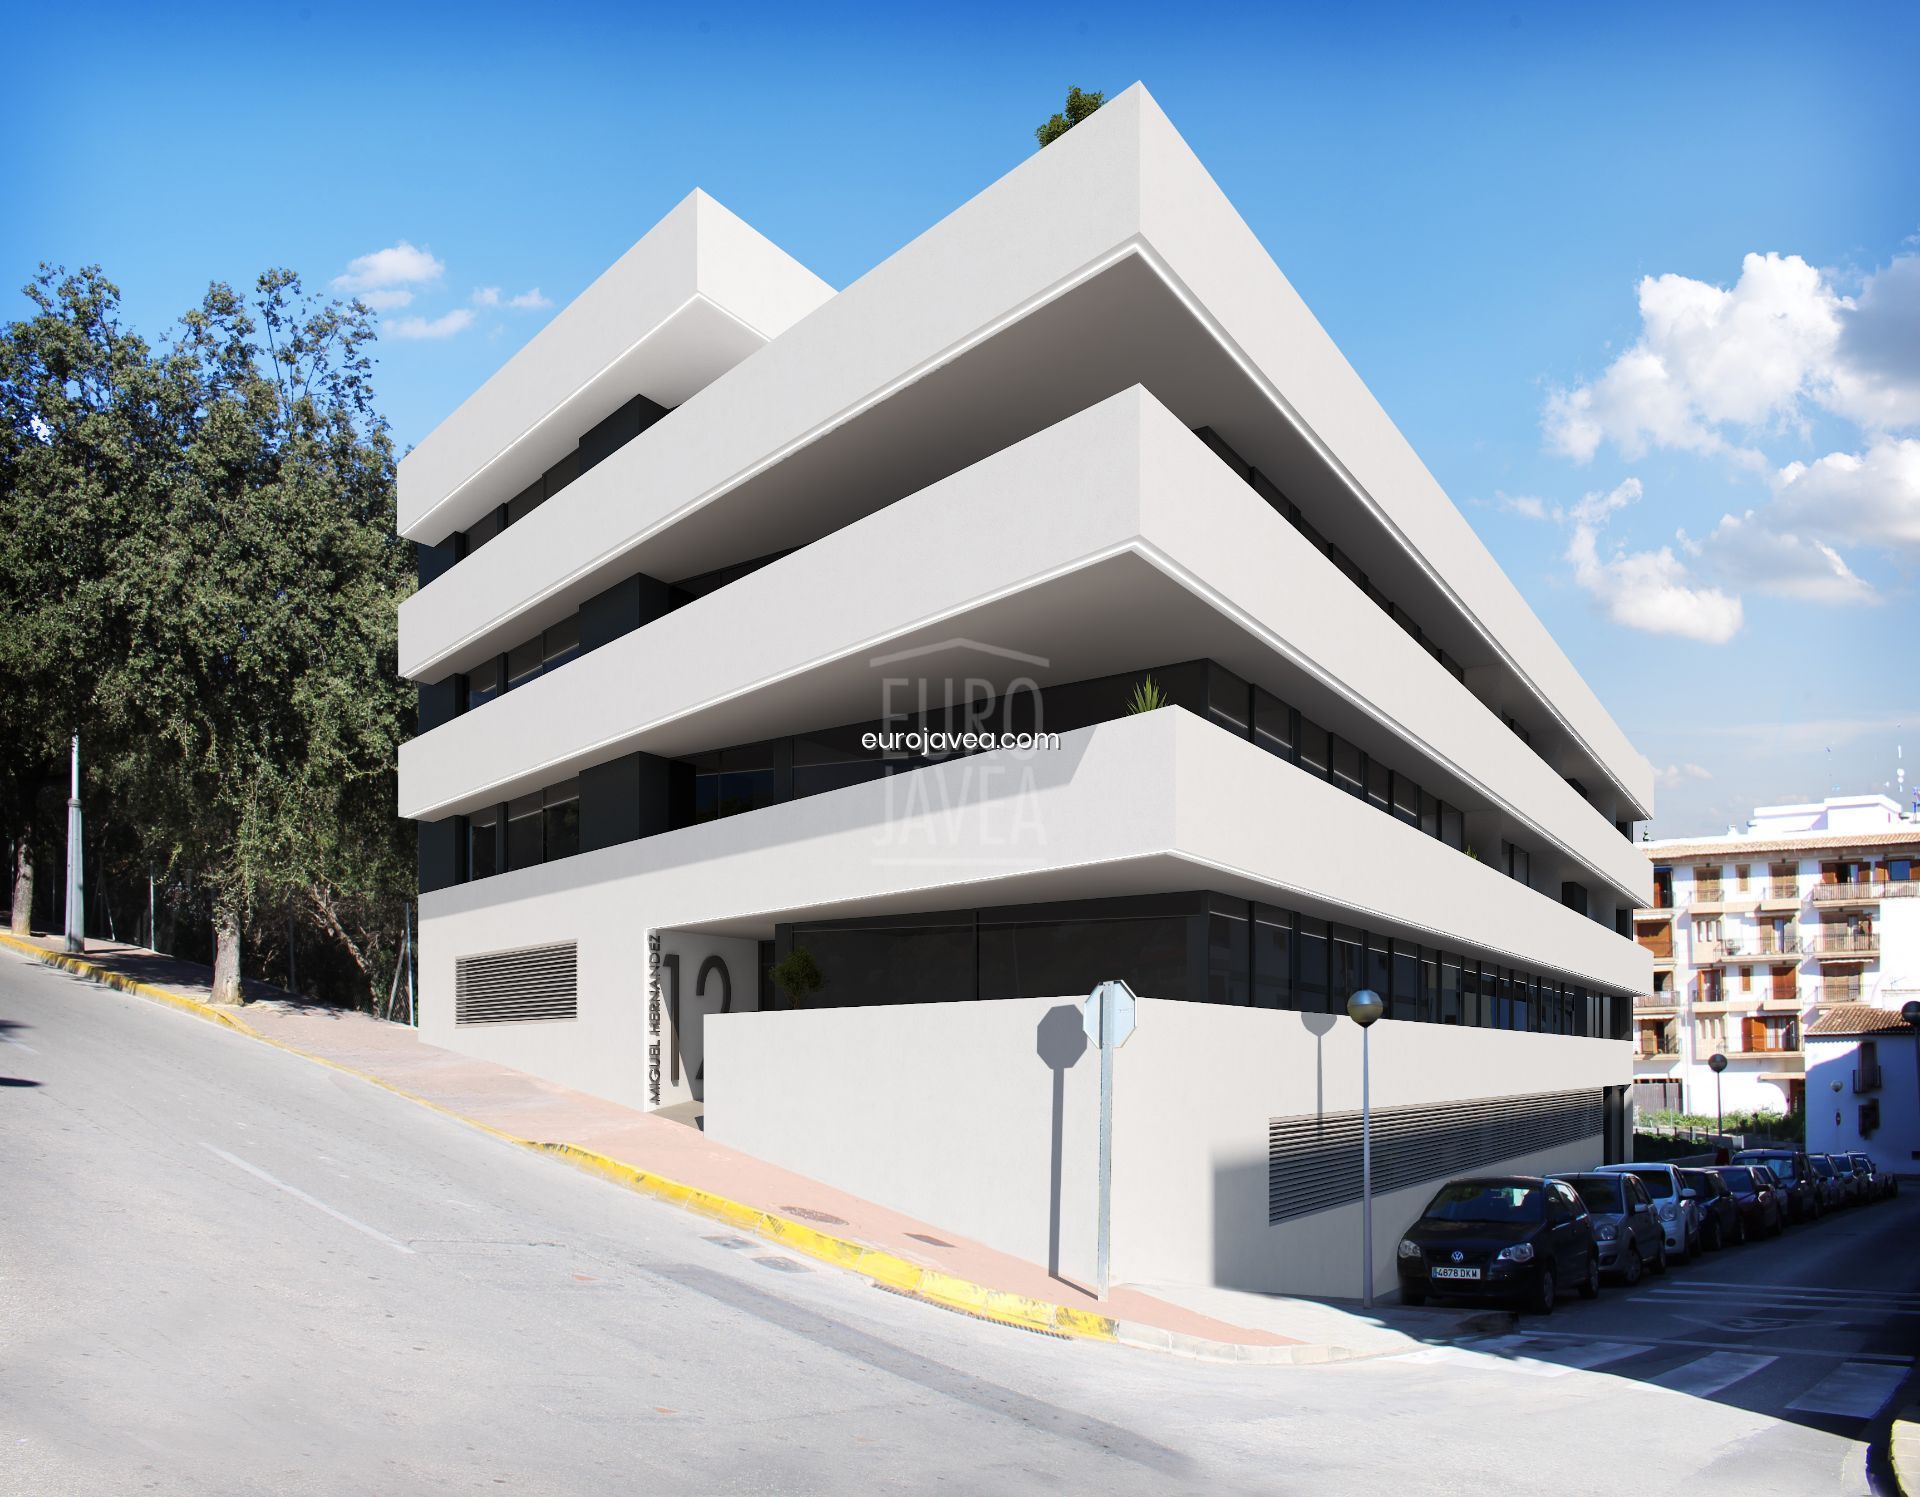 New building for sale in the center of Jávea. Exclusive with Eurojavea Real Estate